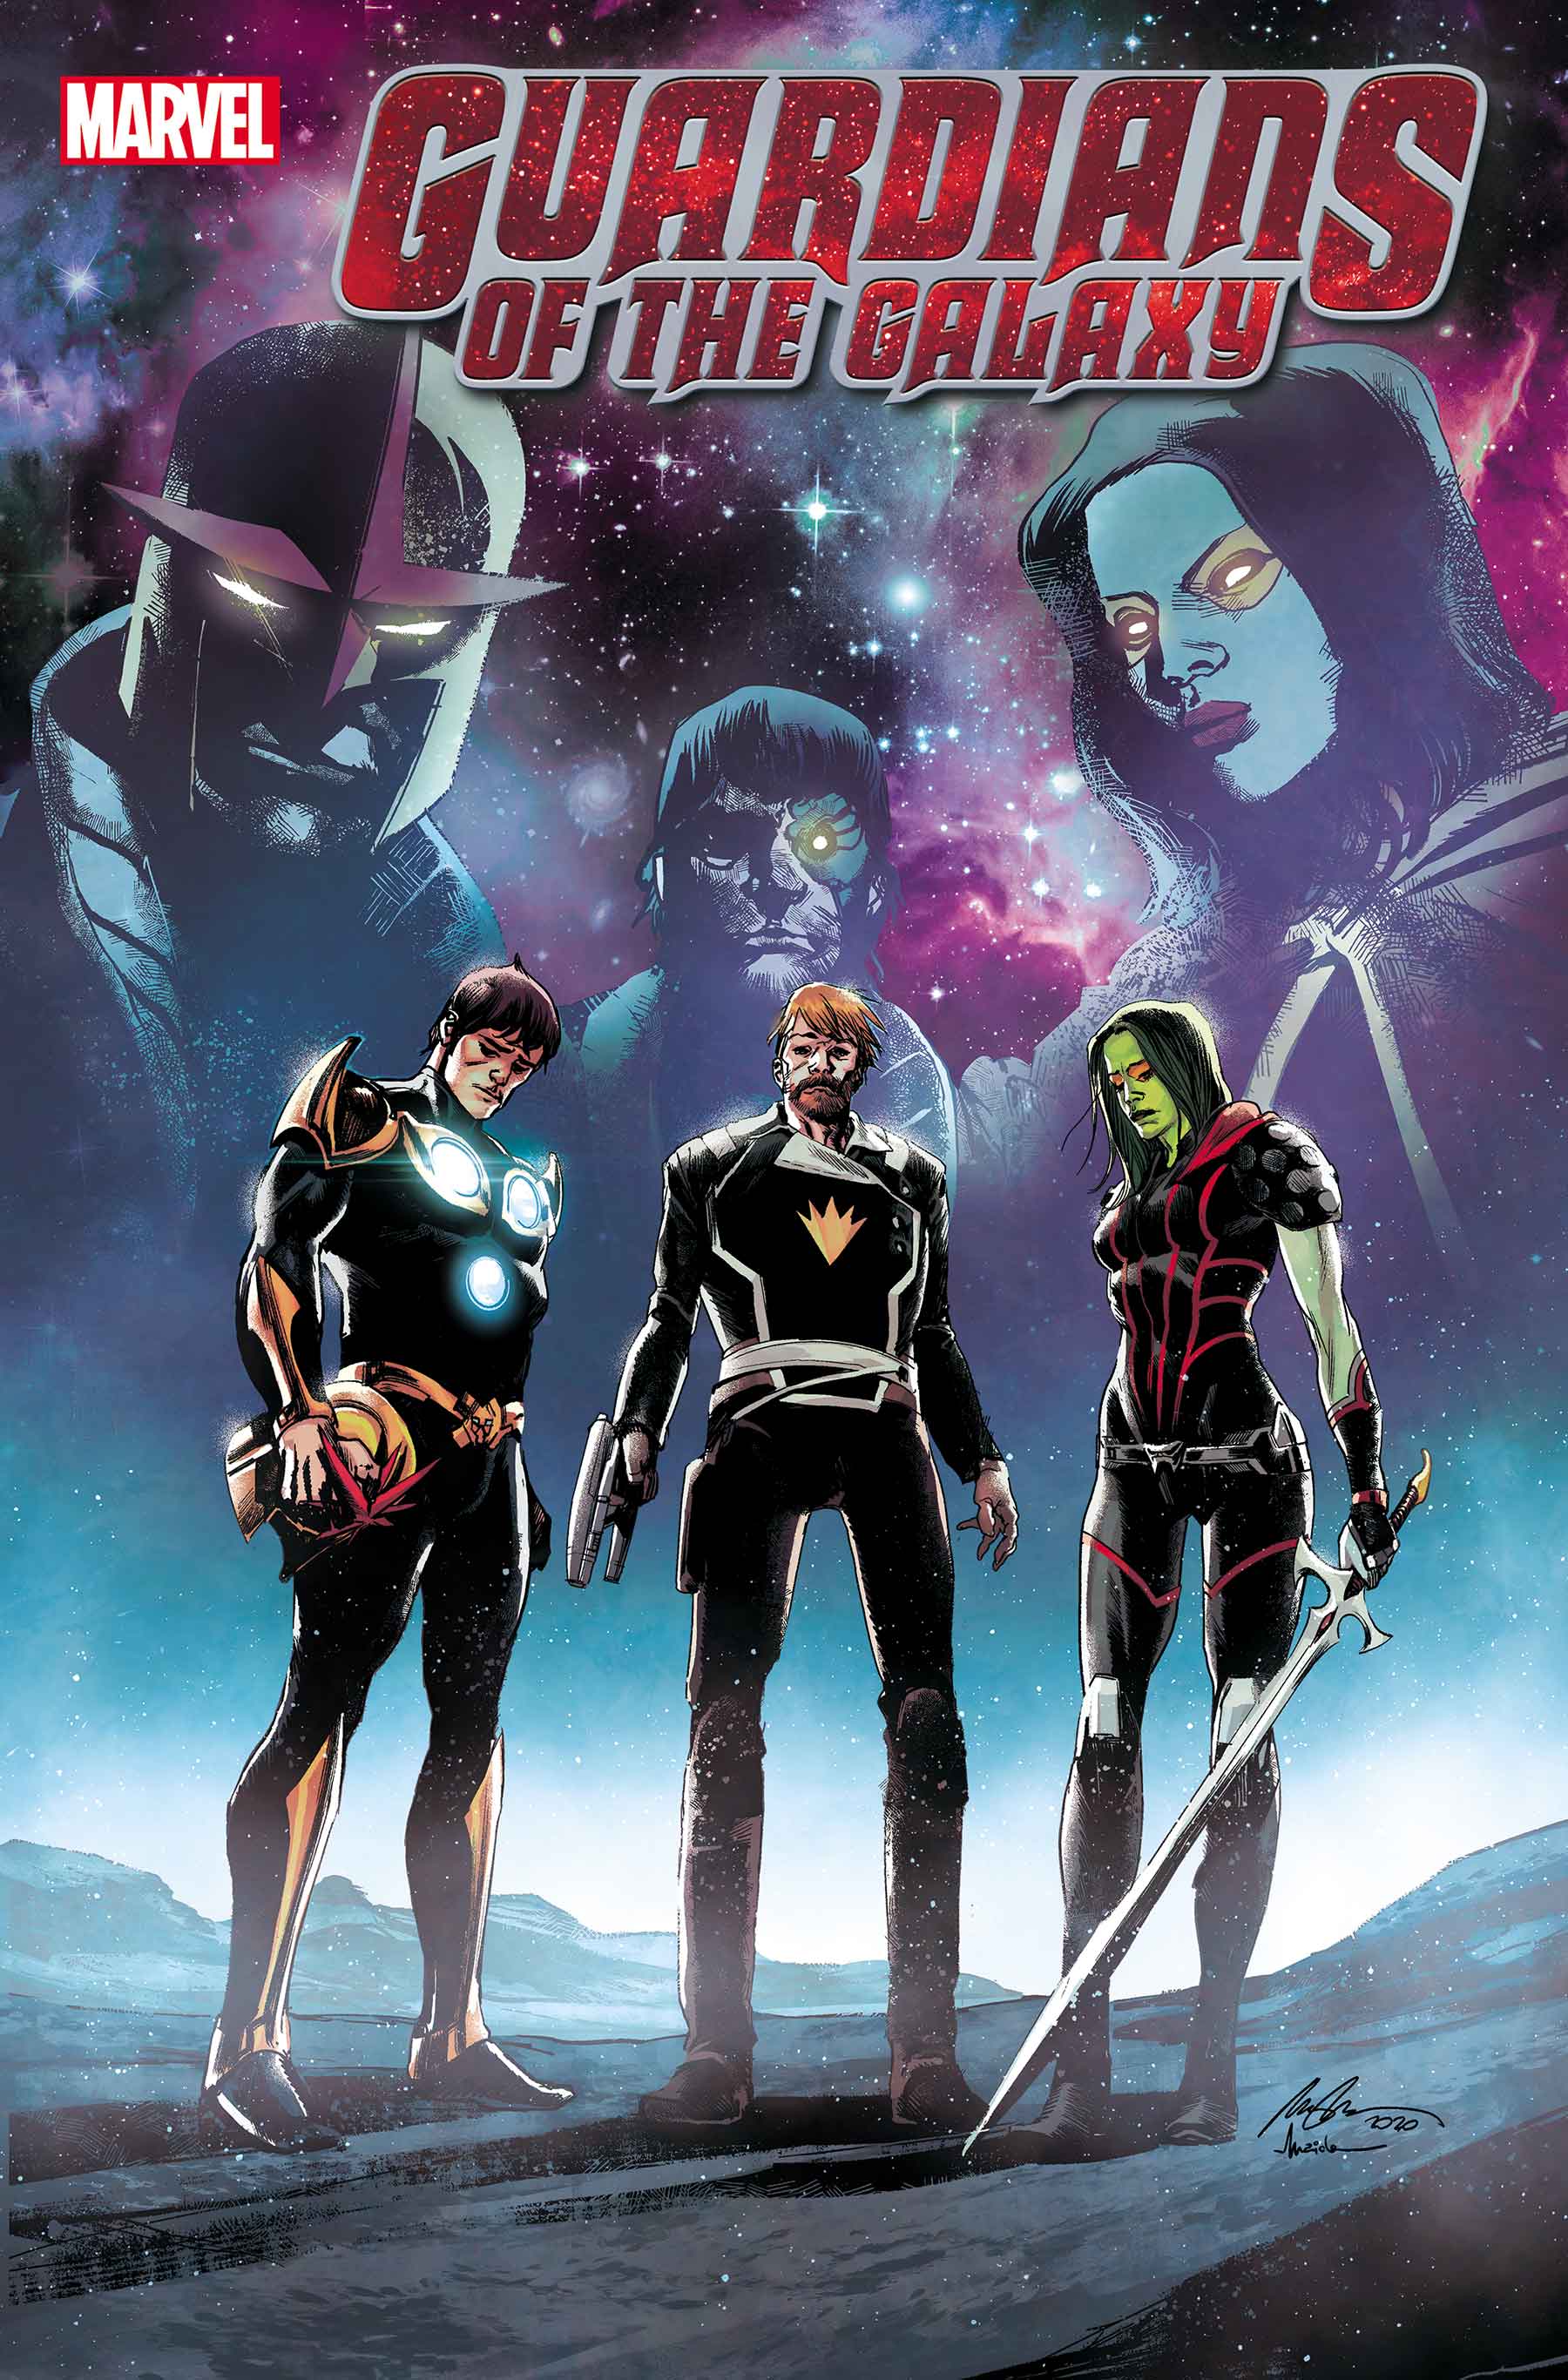 Marvel event Annihilation to be revisited in February's Guardians of